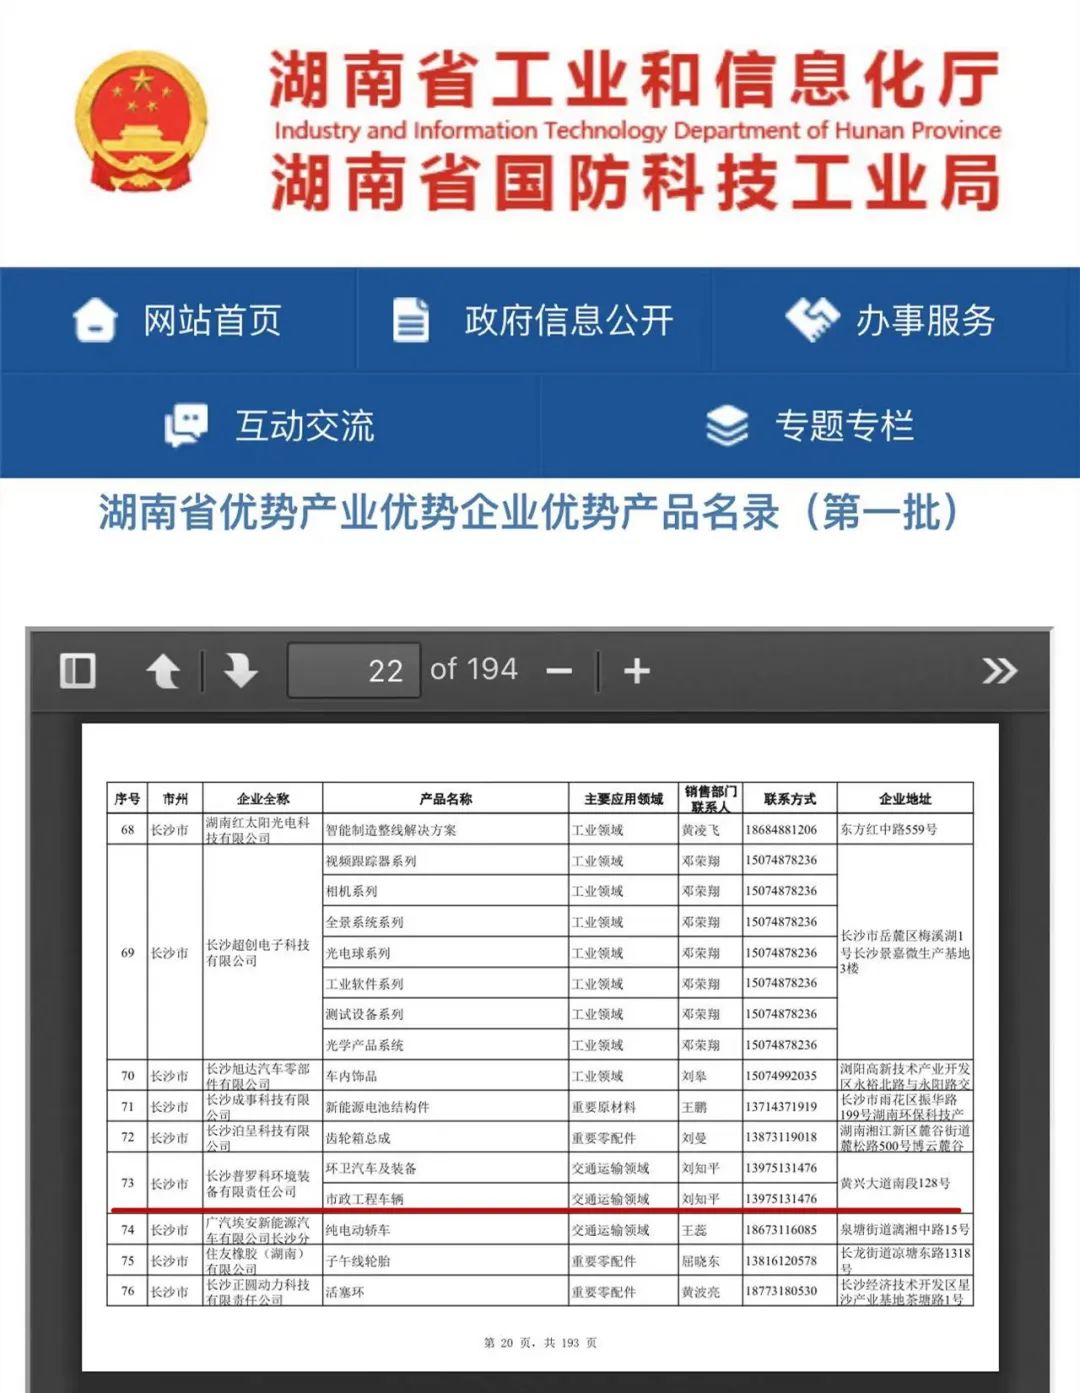 Good news! Fukuda Proko was selected into the list of superior products of superior industries and enterprises in Hunan Province